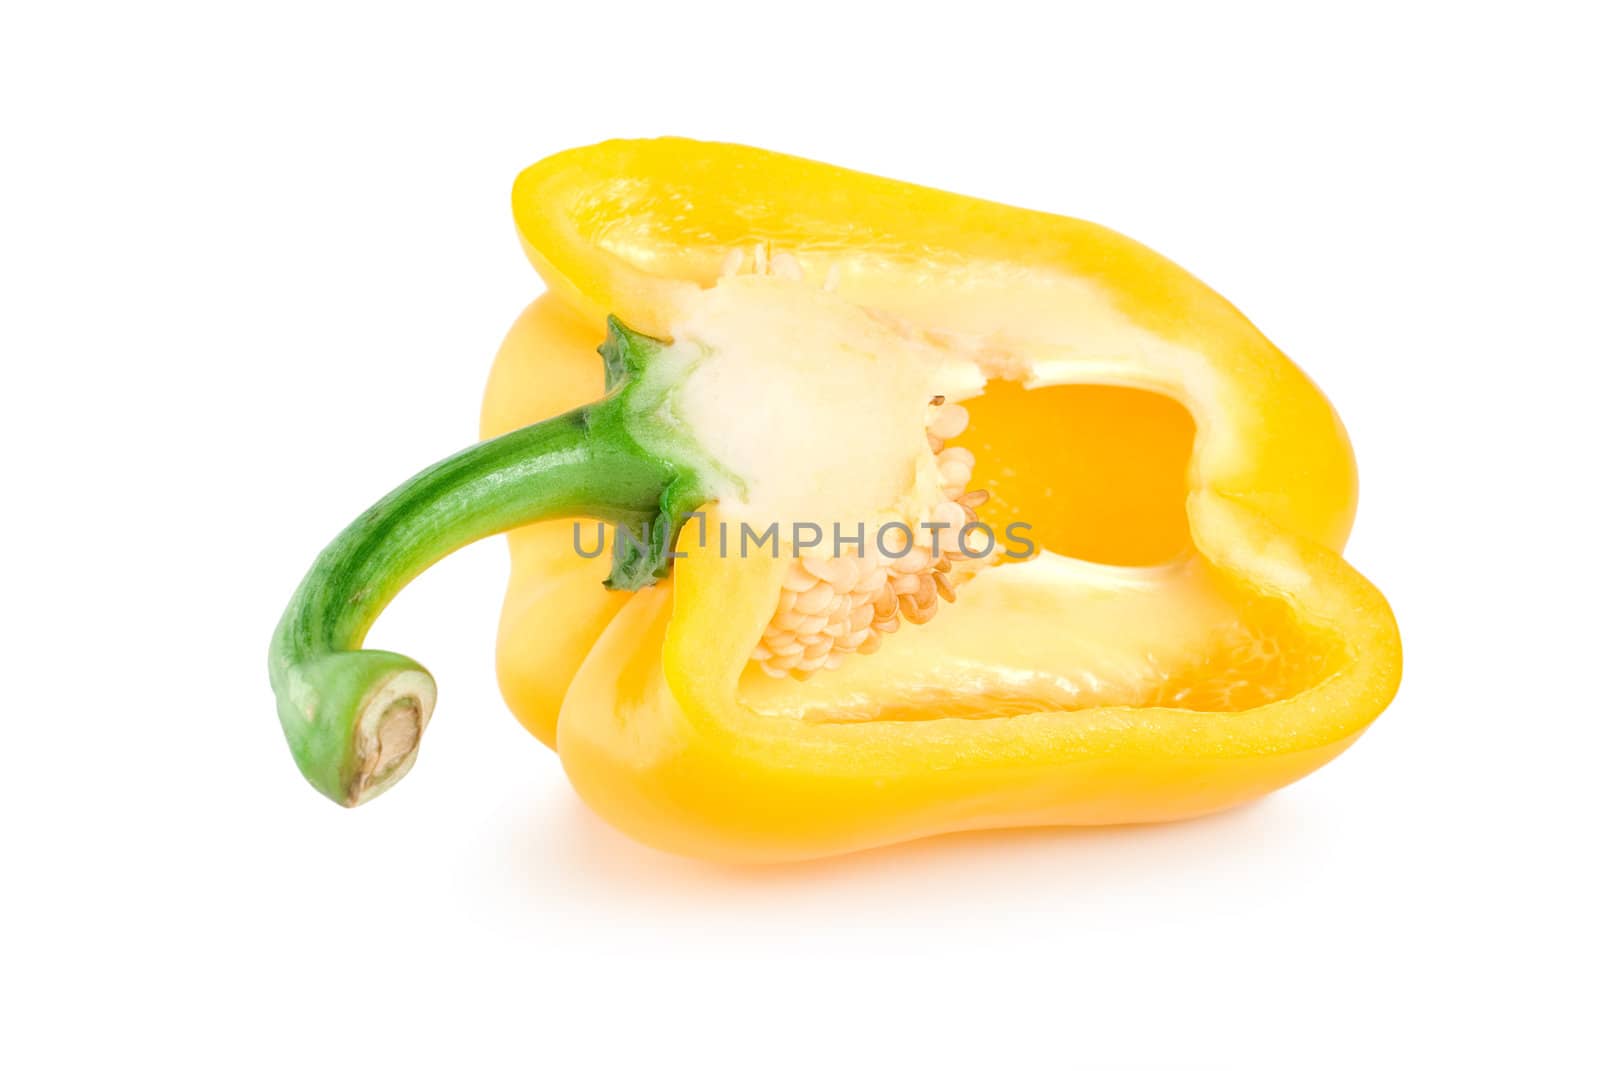 Cutting the yellow pepper by Givaga